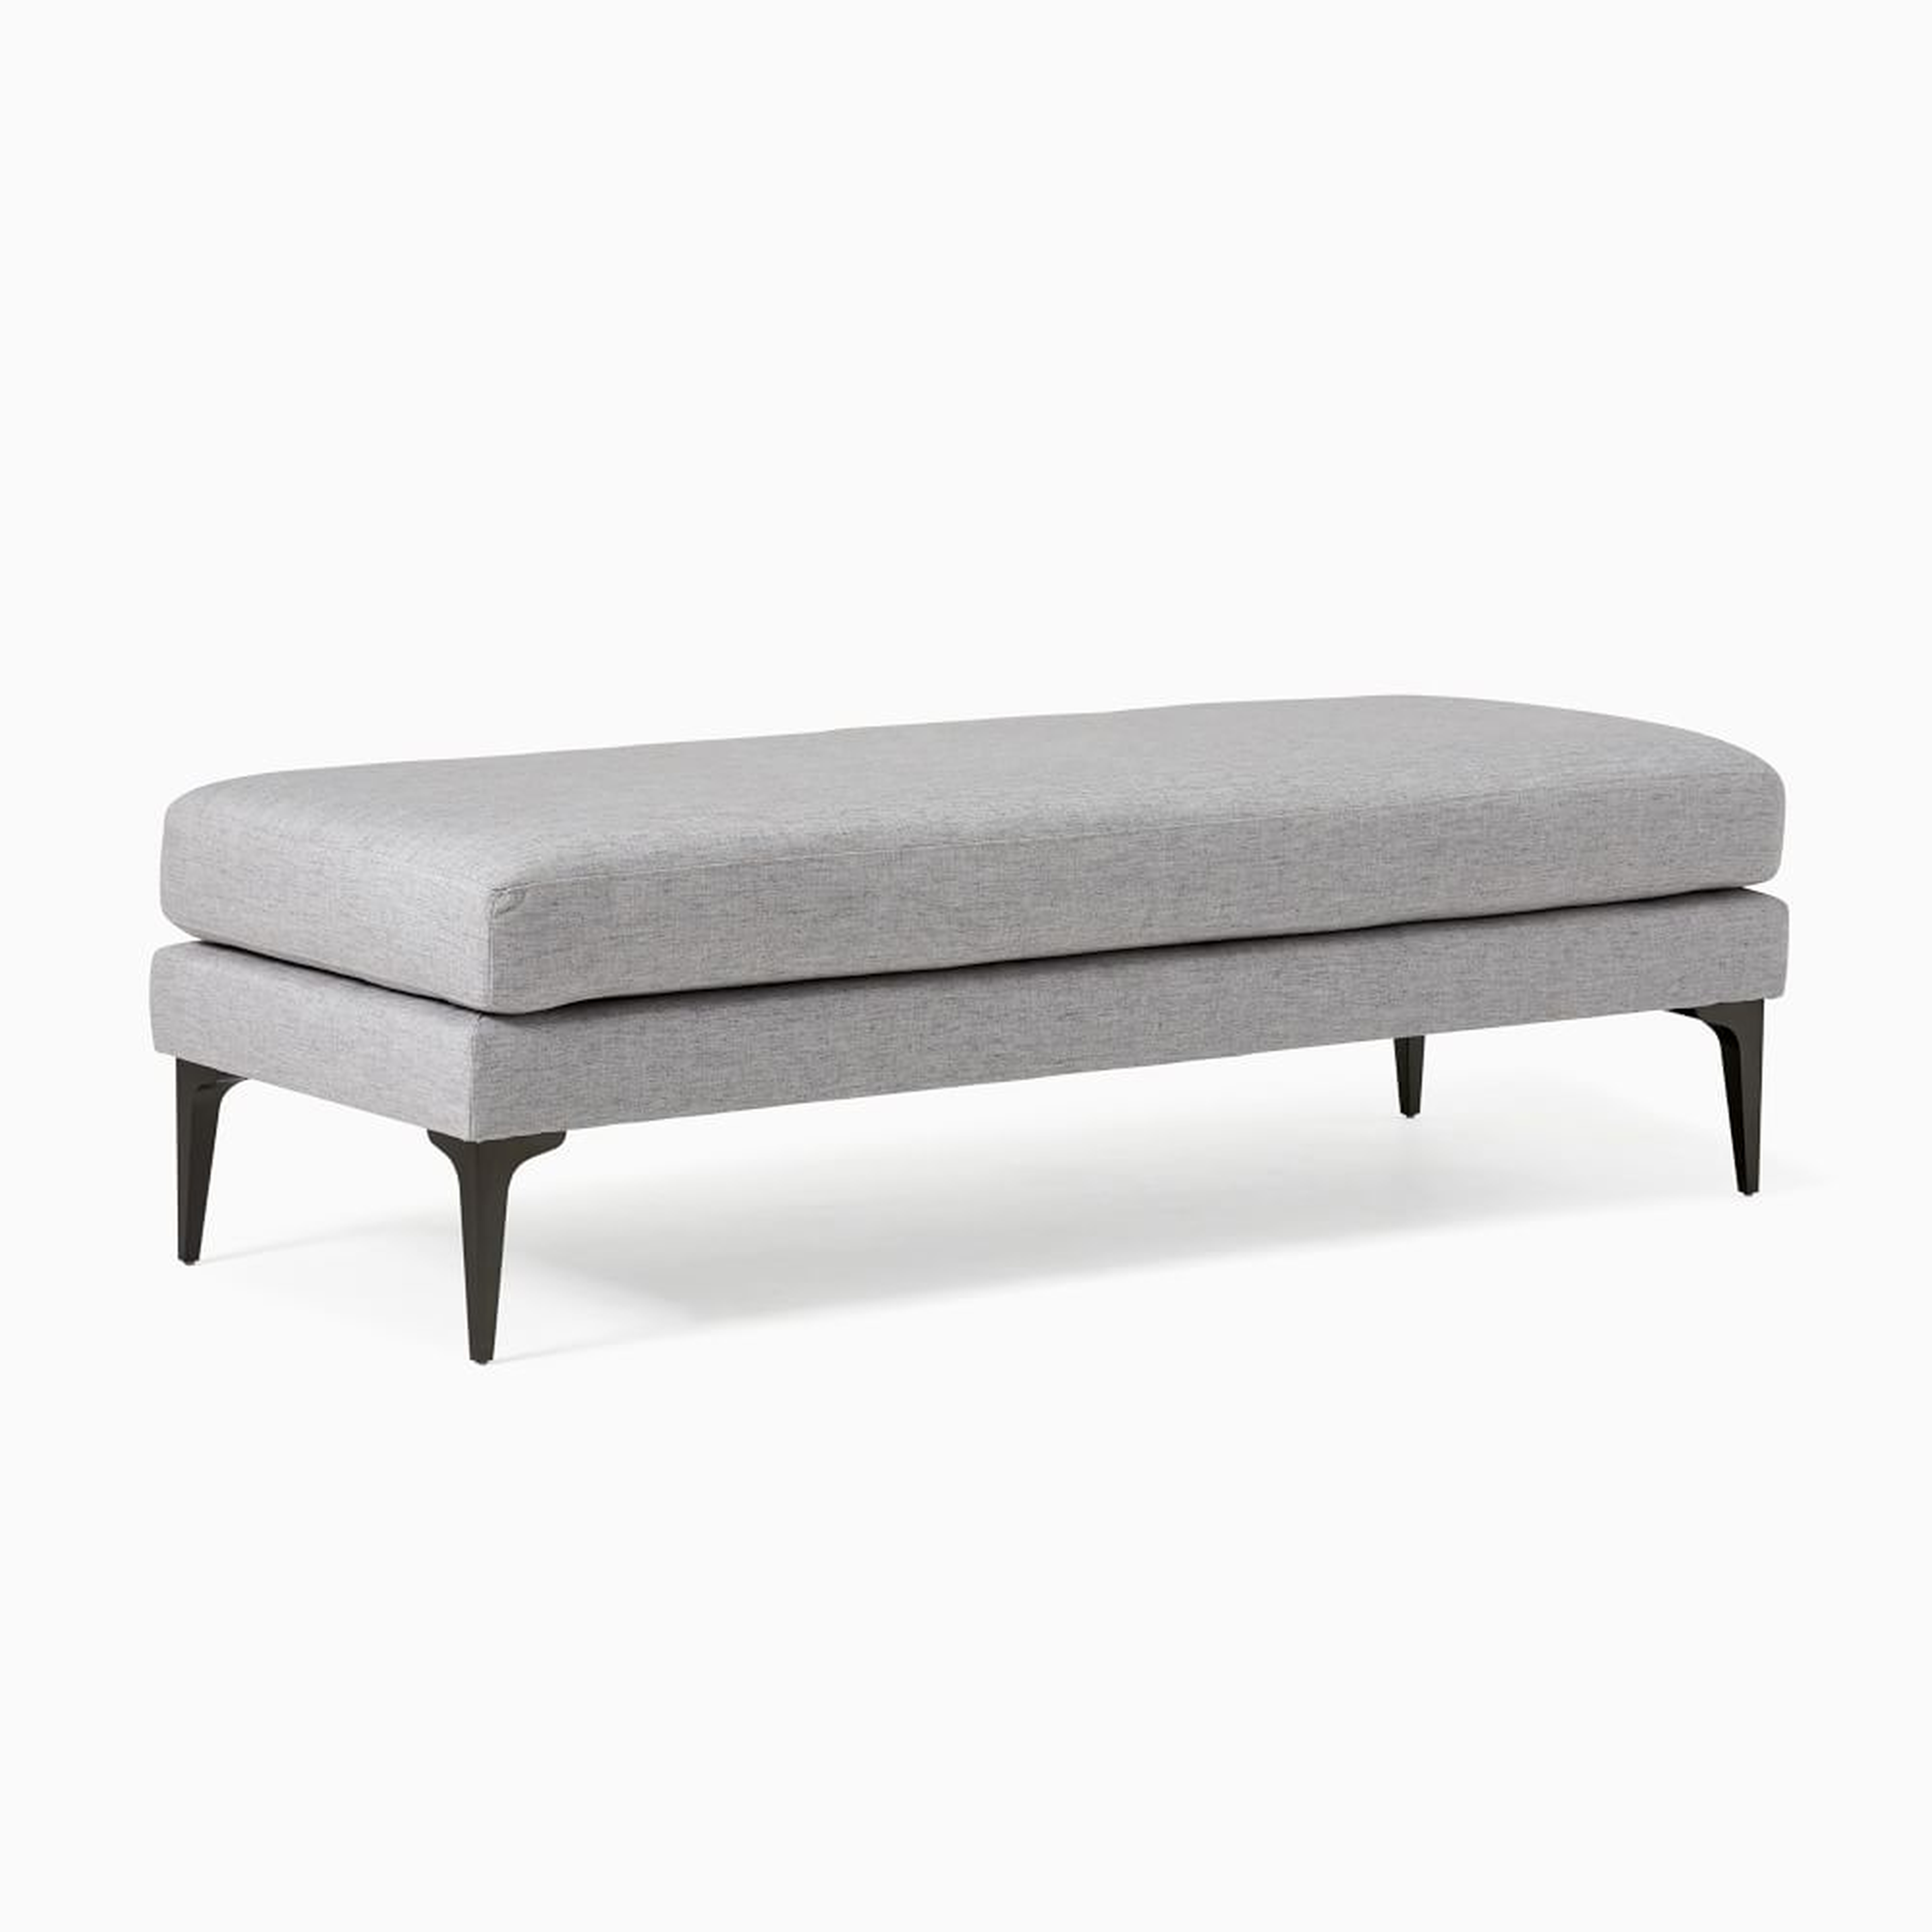 Andes Bench, Poly, Performance Coastal Linen, Storm Gray, Dark Pewter - West Elm